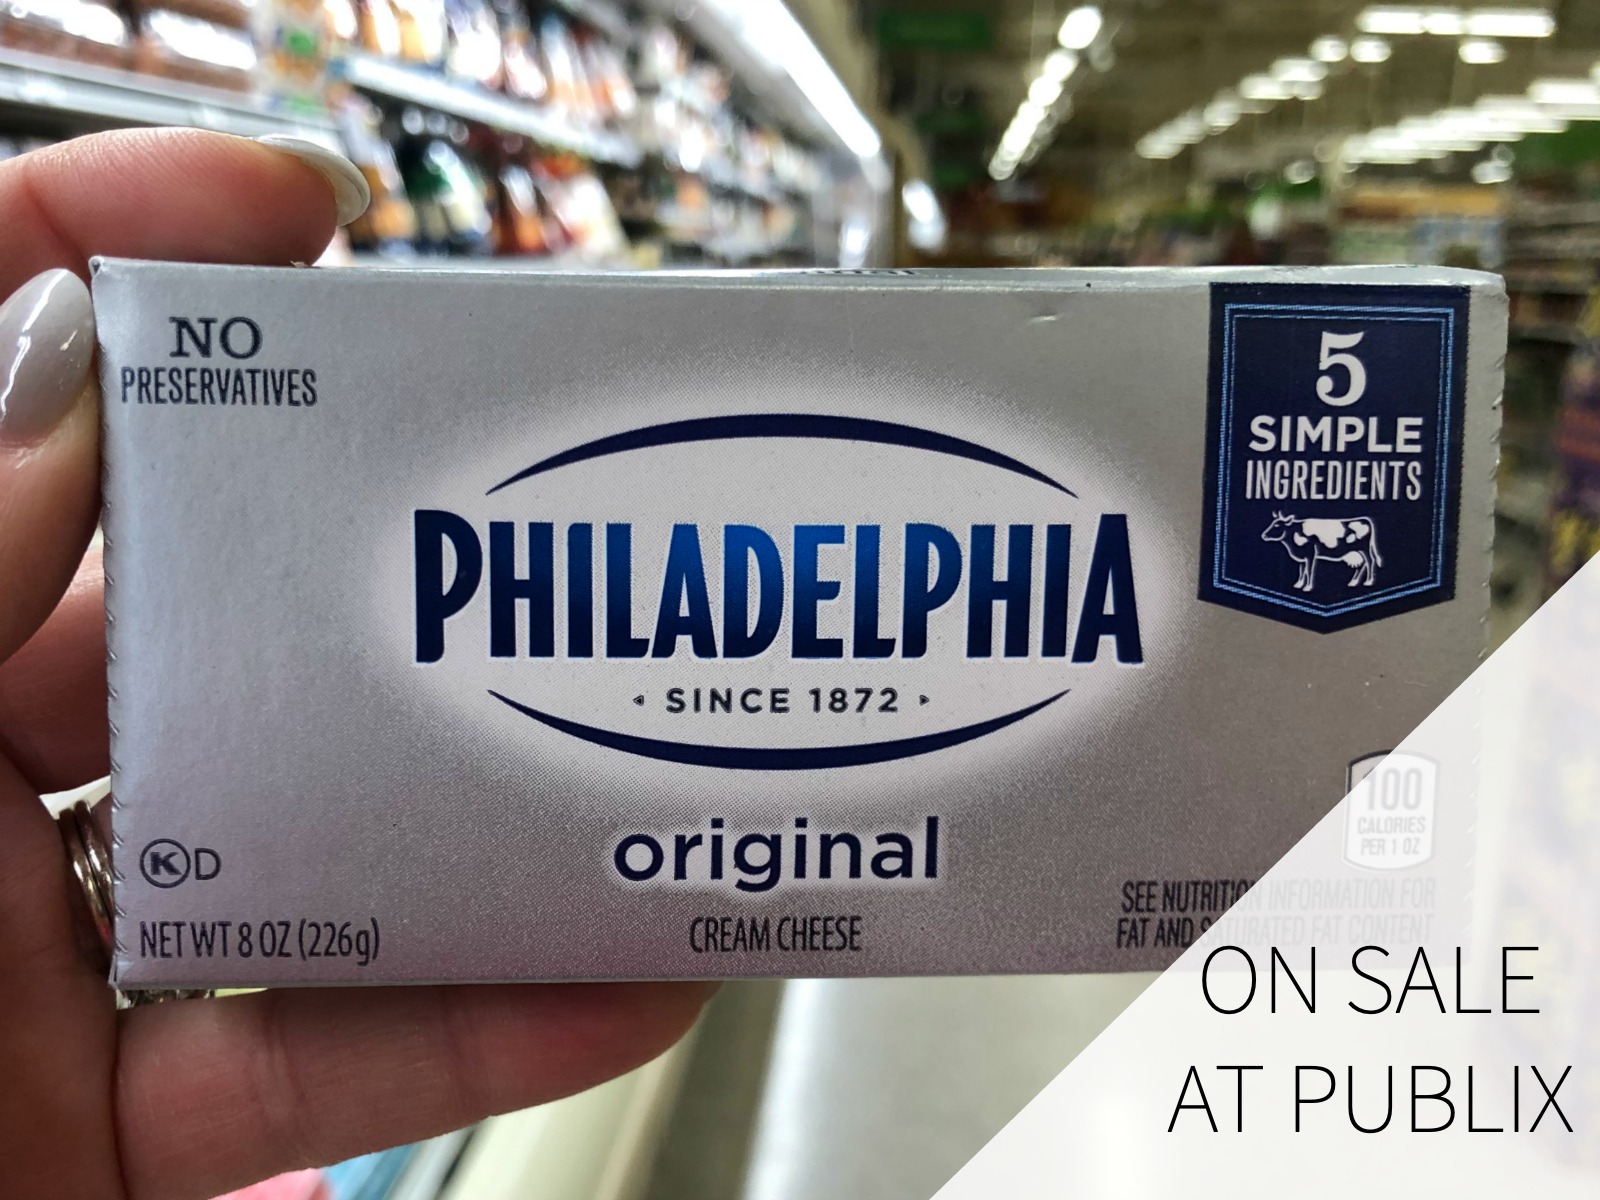 Stock Up On PHILADELPHIA Cream Cheese For All Your Favorite Holiday Foods & Recipes – Save Now At Publix